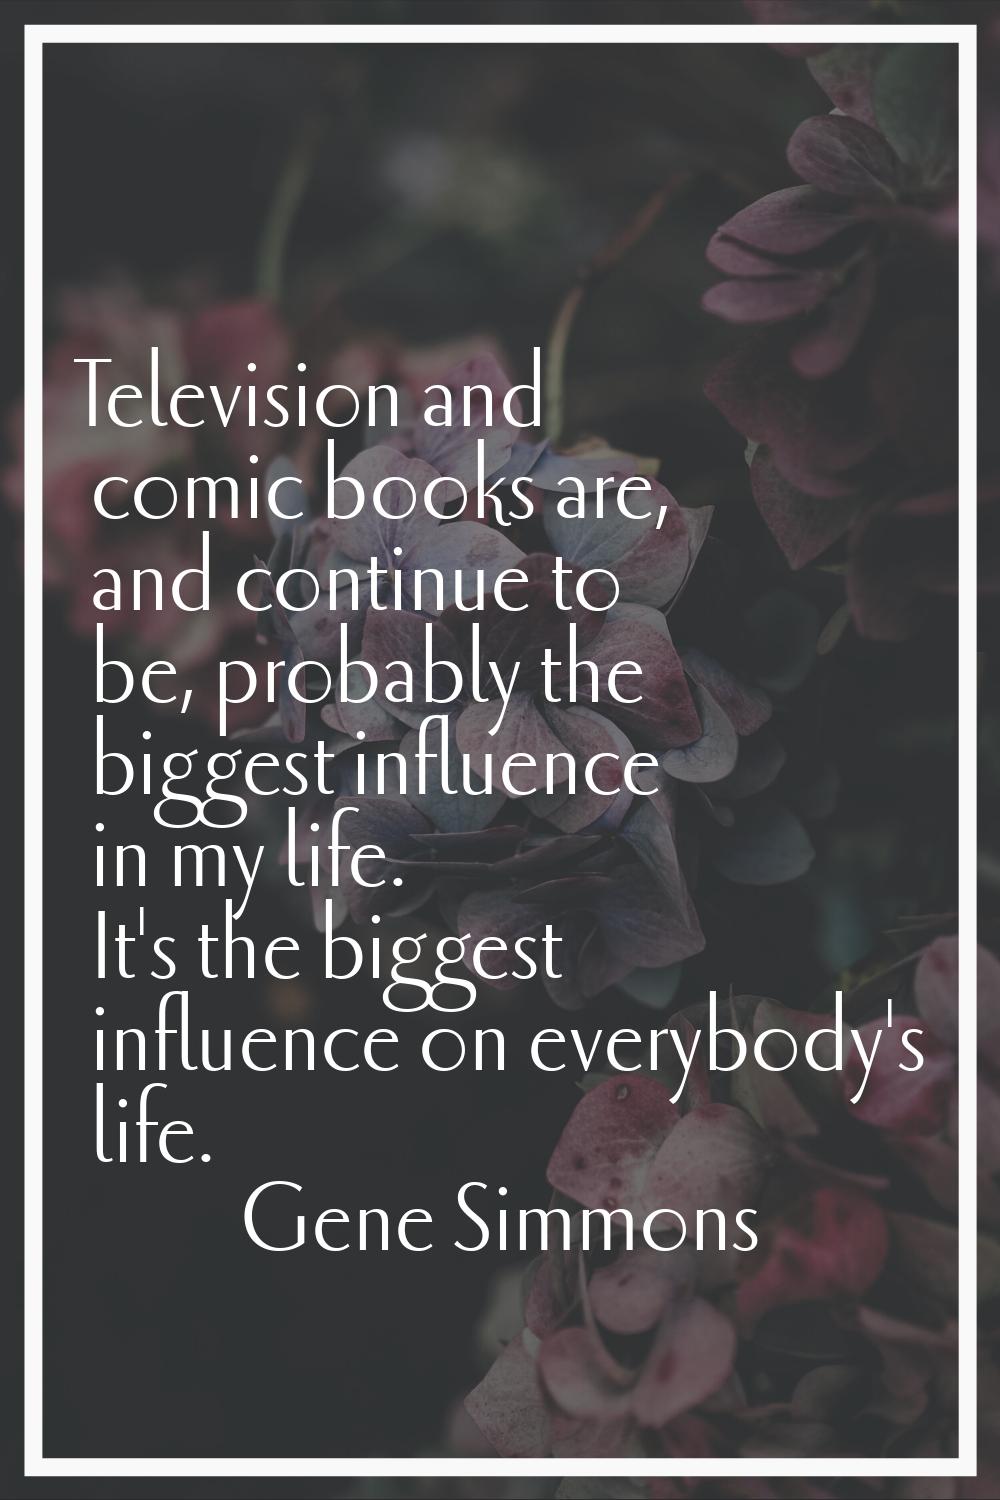 Television and comic books are, and continue to be, probably the biggest influence in my life. It's